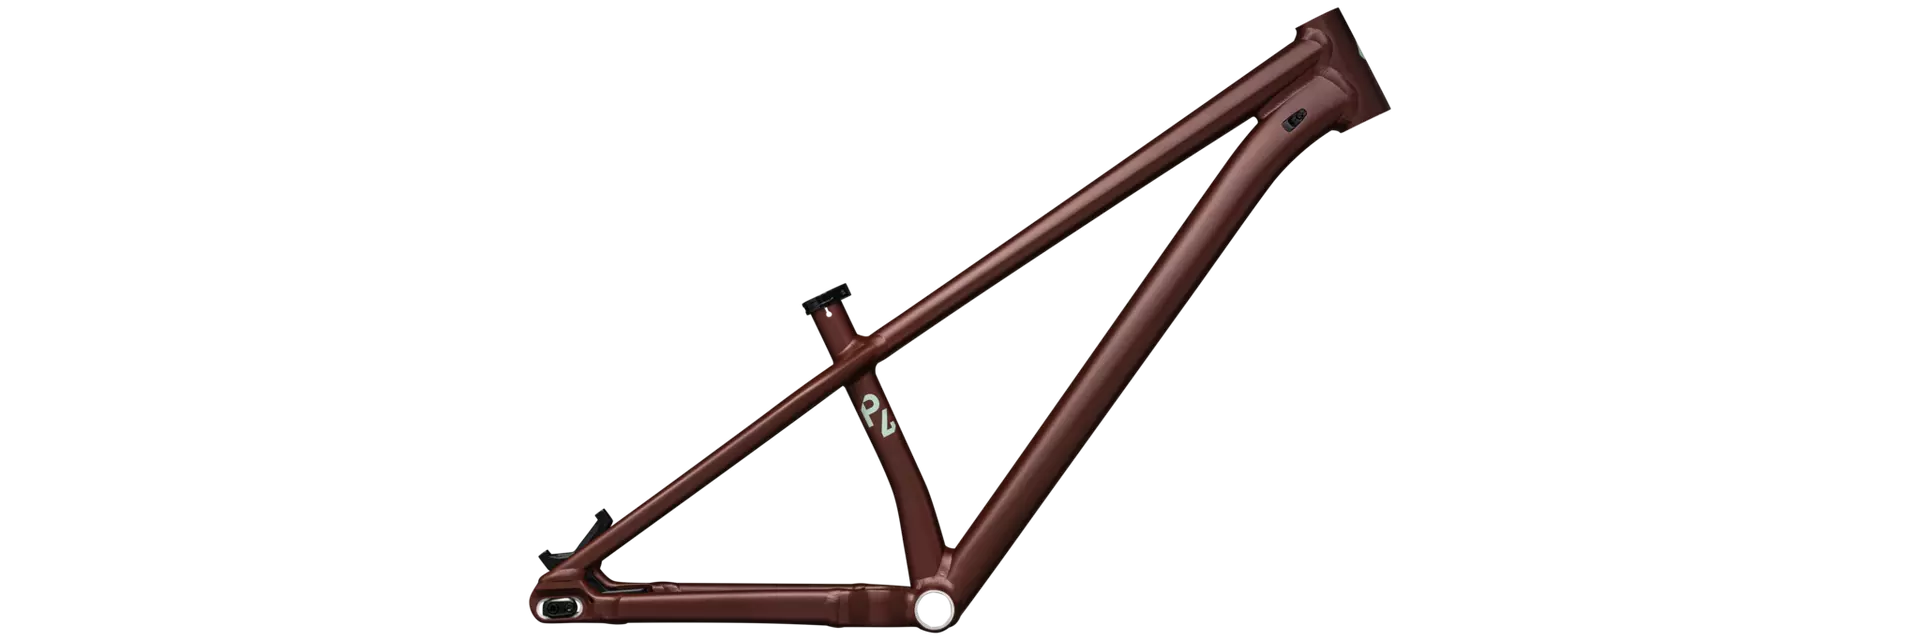 2023 Specialized P Series P4 27.5" Frame